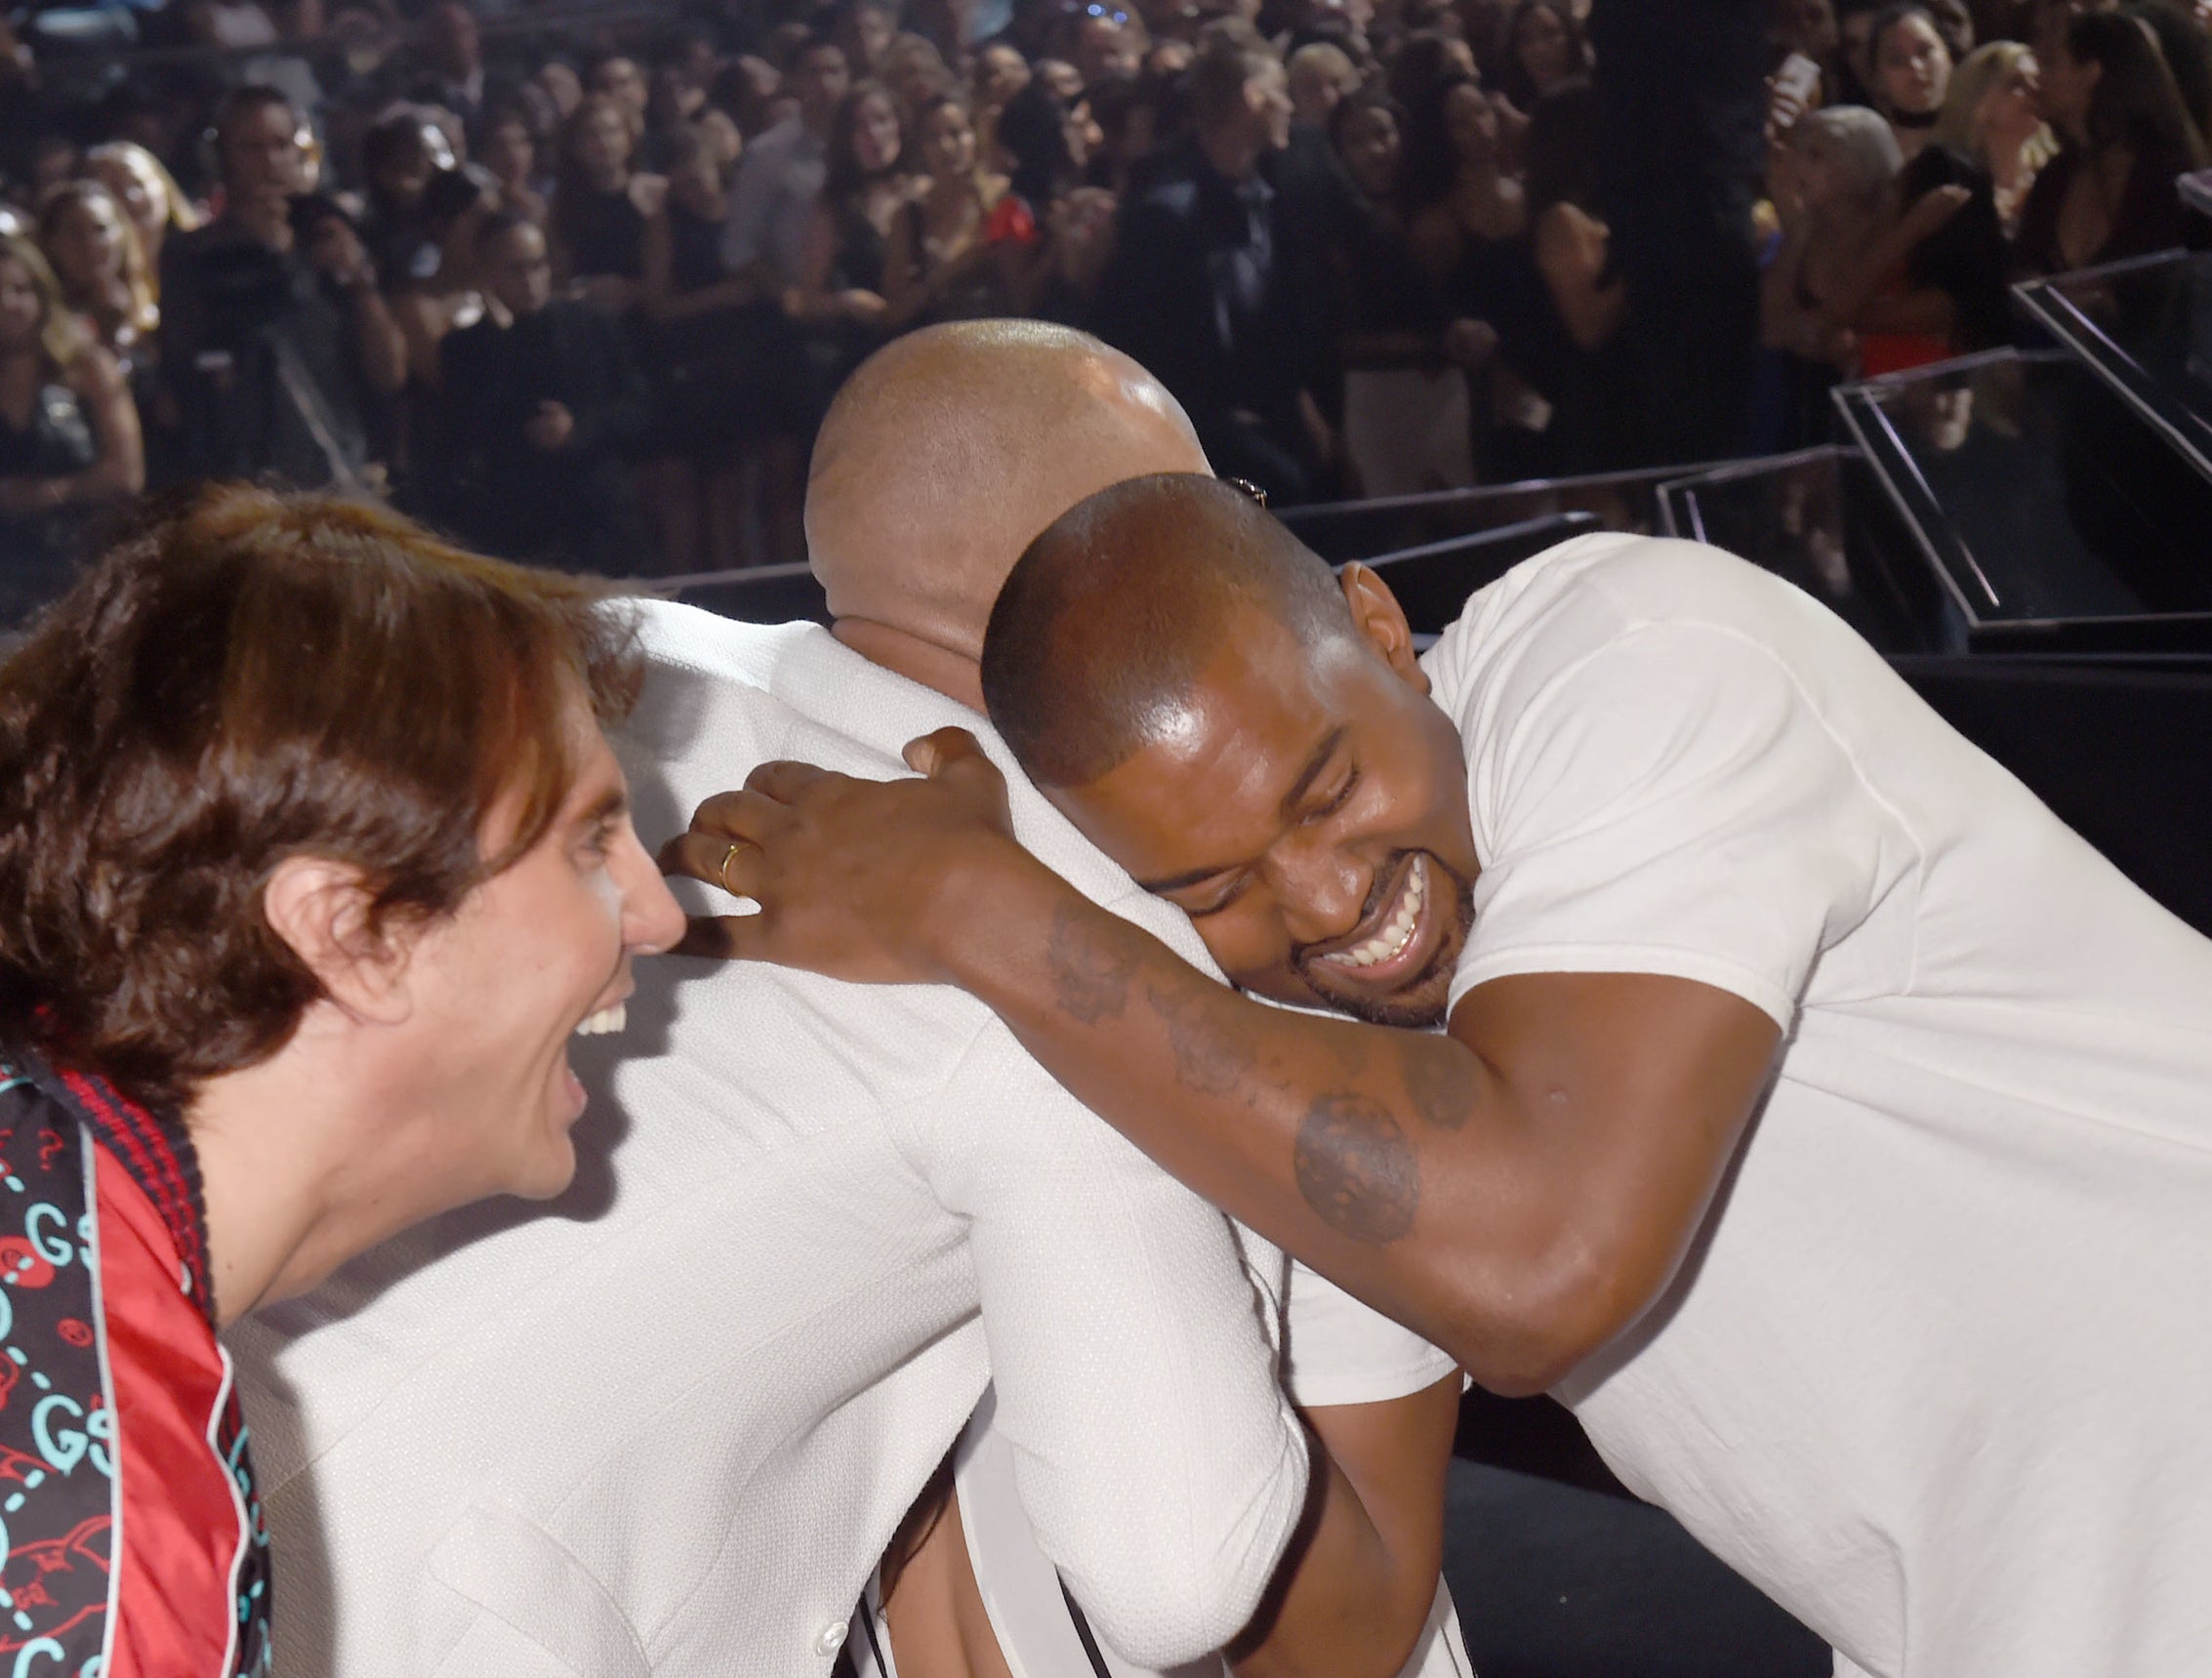 Jonathan leans over and smiles while Kanye hugs another friend